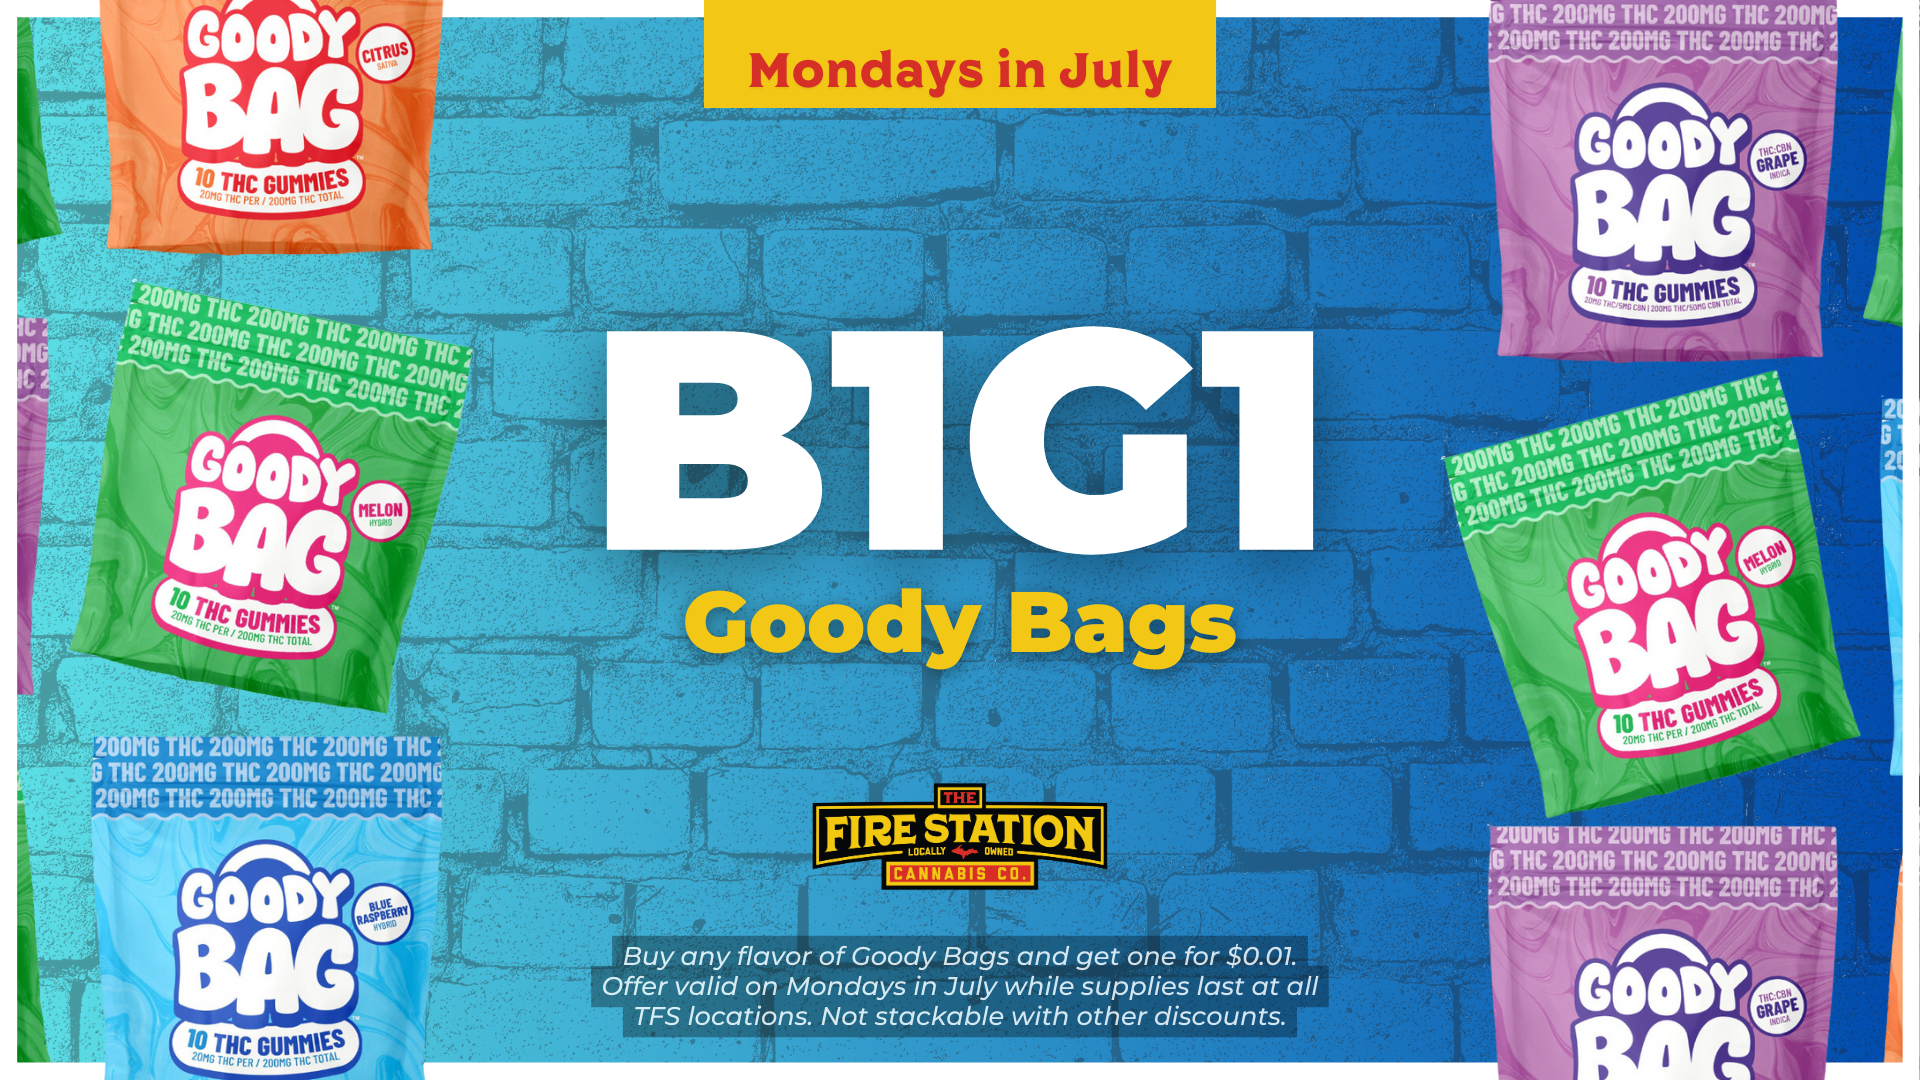 Buy any flavor of Goody Bags and get one for $0.01. Offer valid on Mondays in July while supplies last at all TFS locations. Not stackable with other discounts.